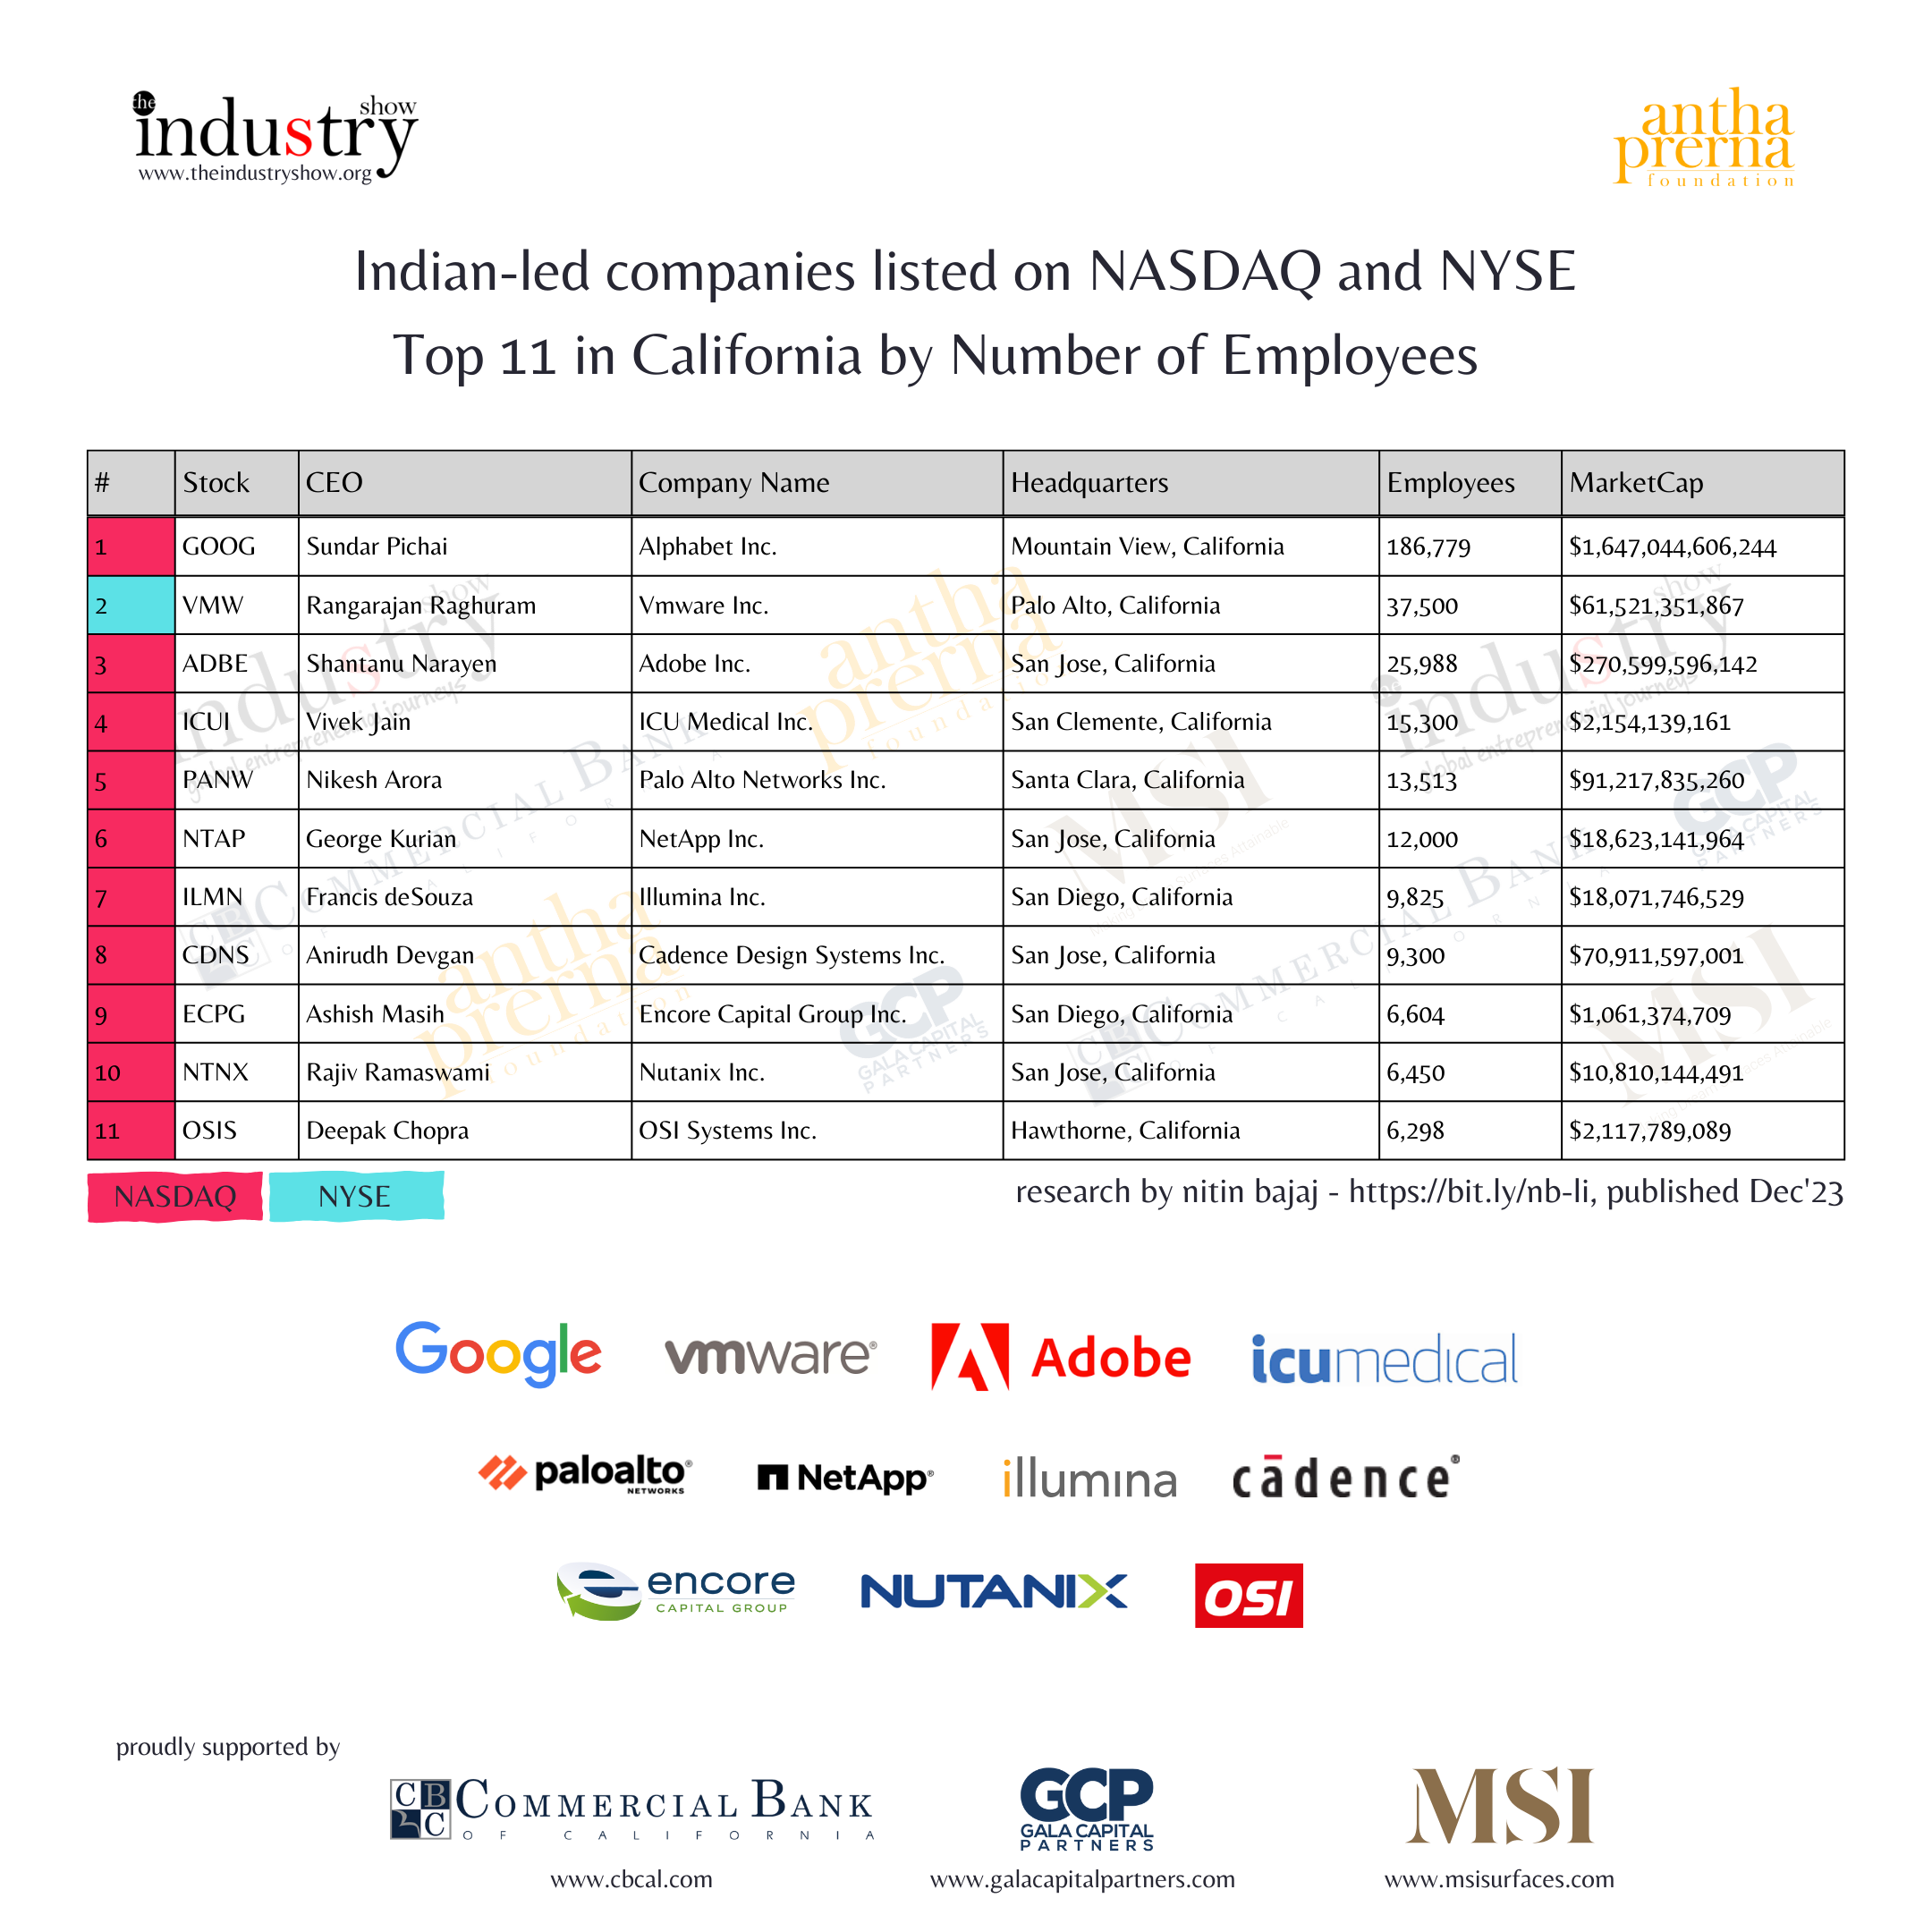 Indian-led companies listed on NASDAQ and NYSE Top 11 in California by No. of Employees